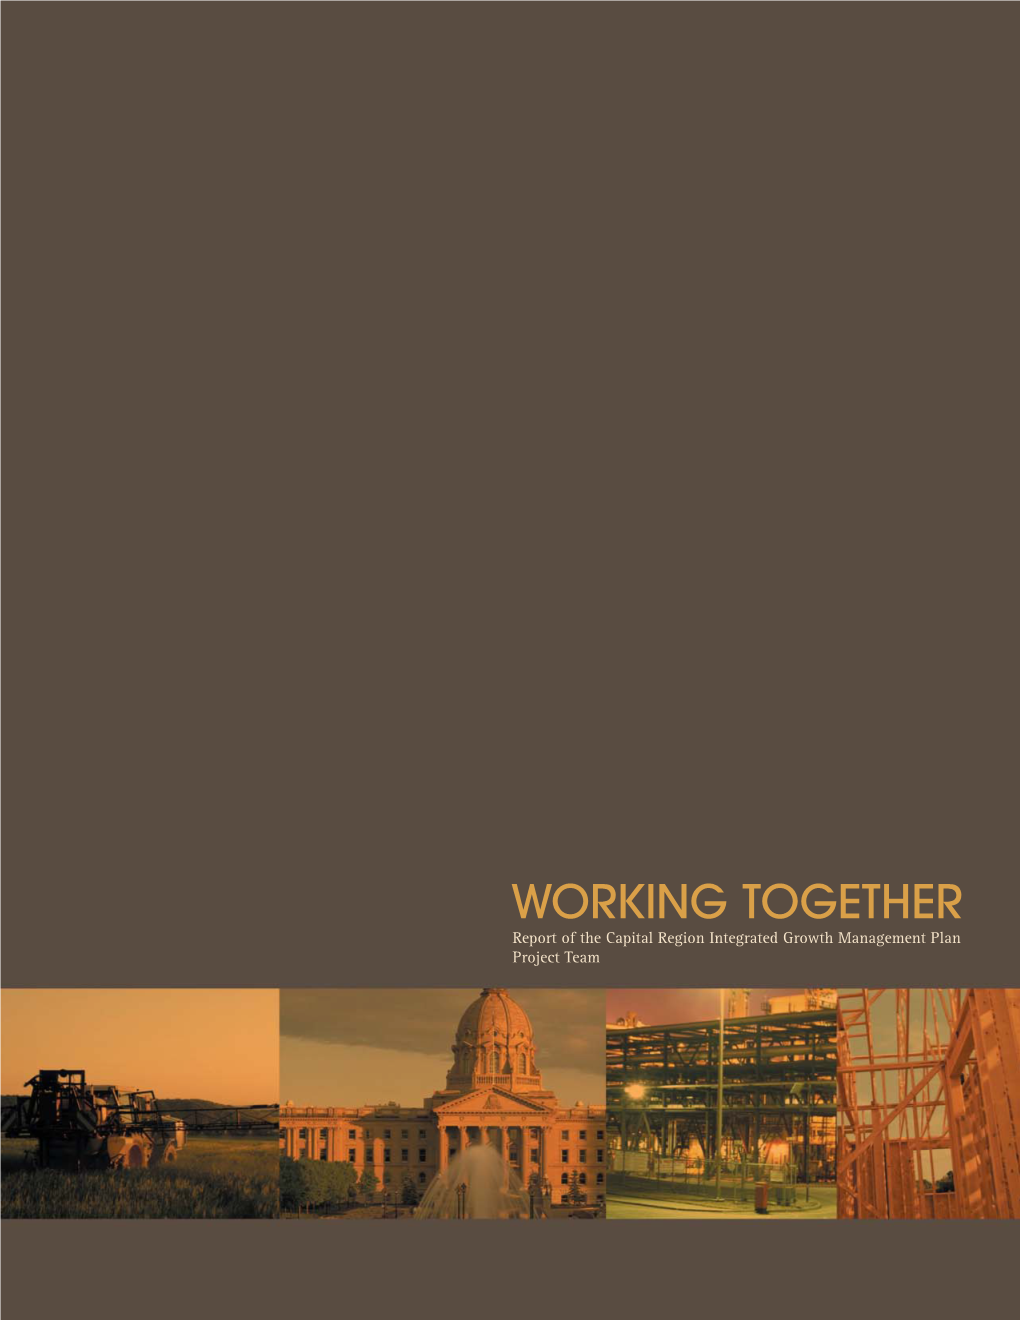 WORKING TOGETHER Report of the Capital Region Integrated Growth Management Plan Project Team